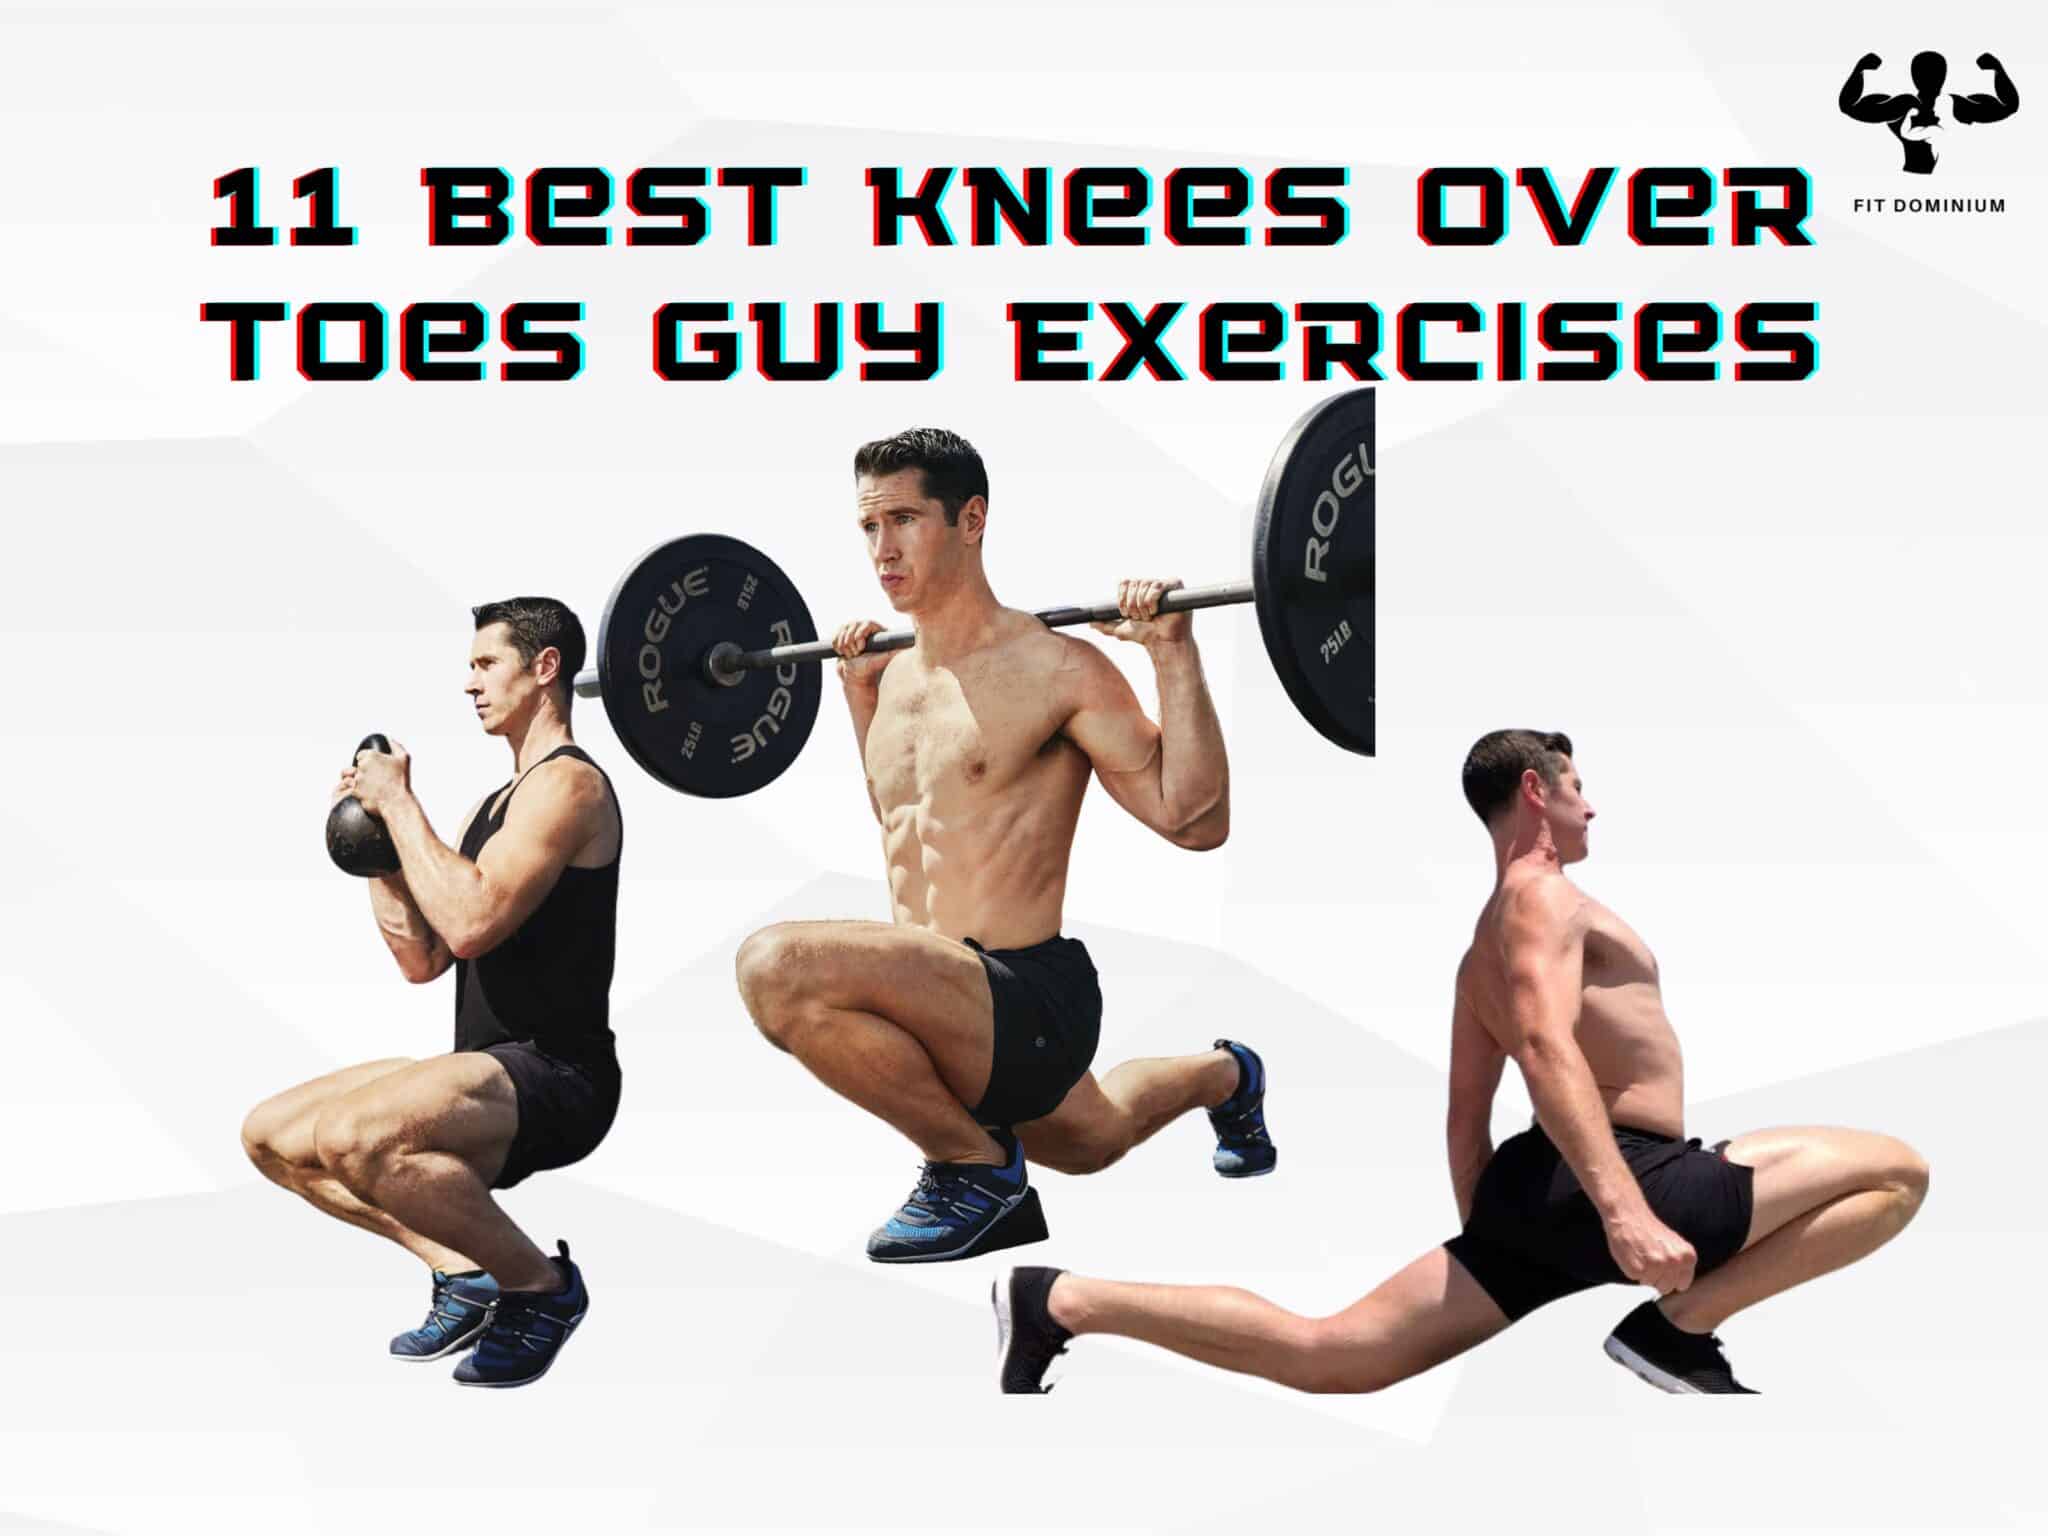 11 Best Knees Over Toes Guy Exercises | FitDominium